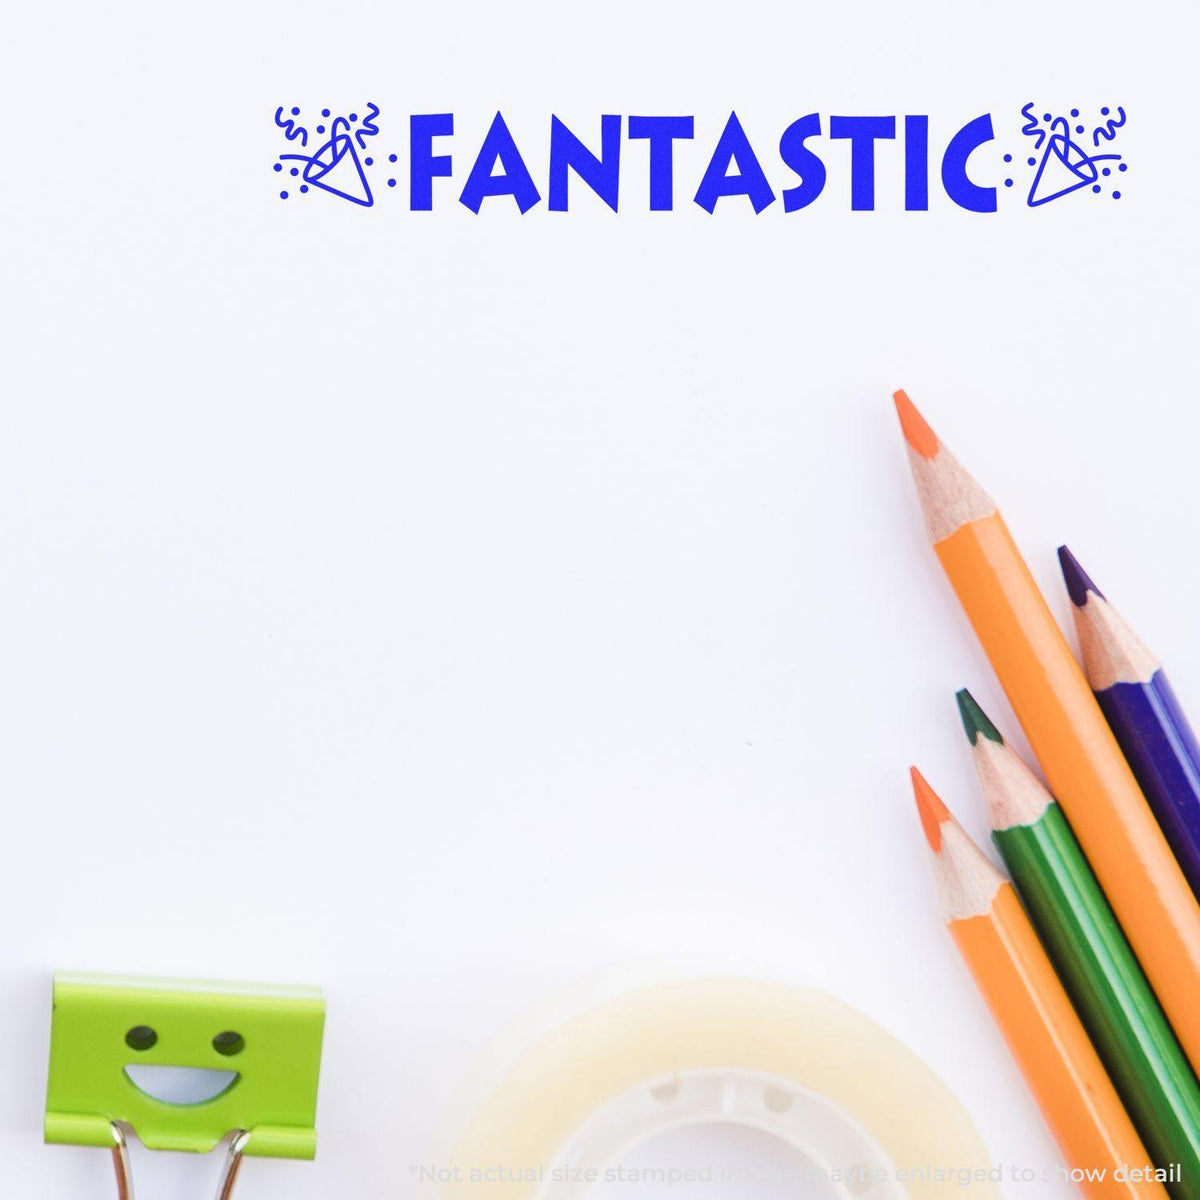 Fantastic with Icons Rubber Stamp In Use Photo